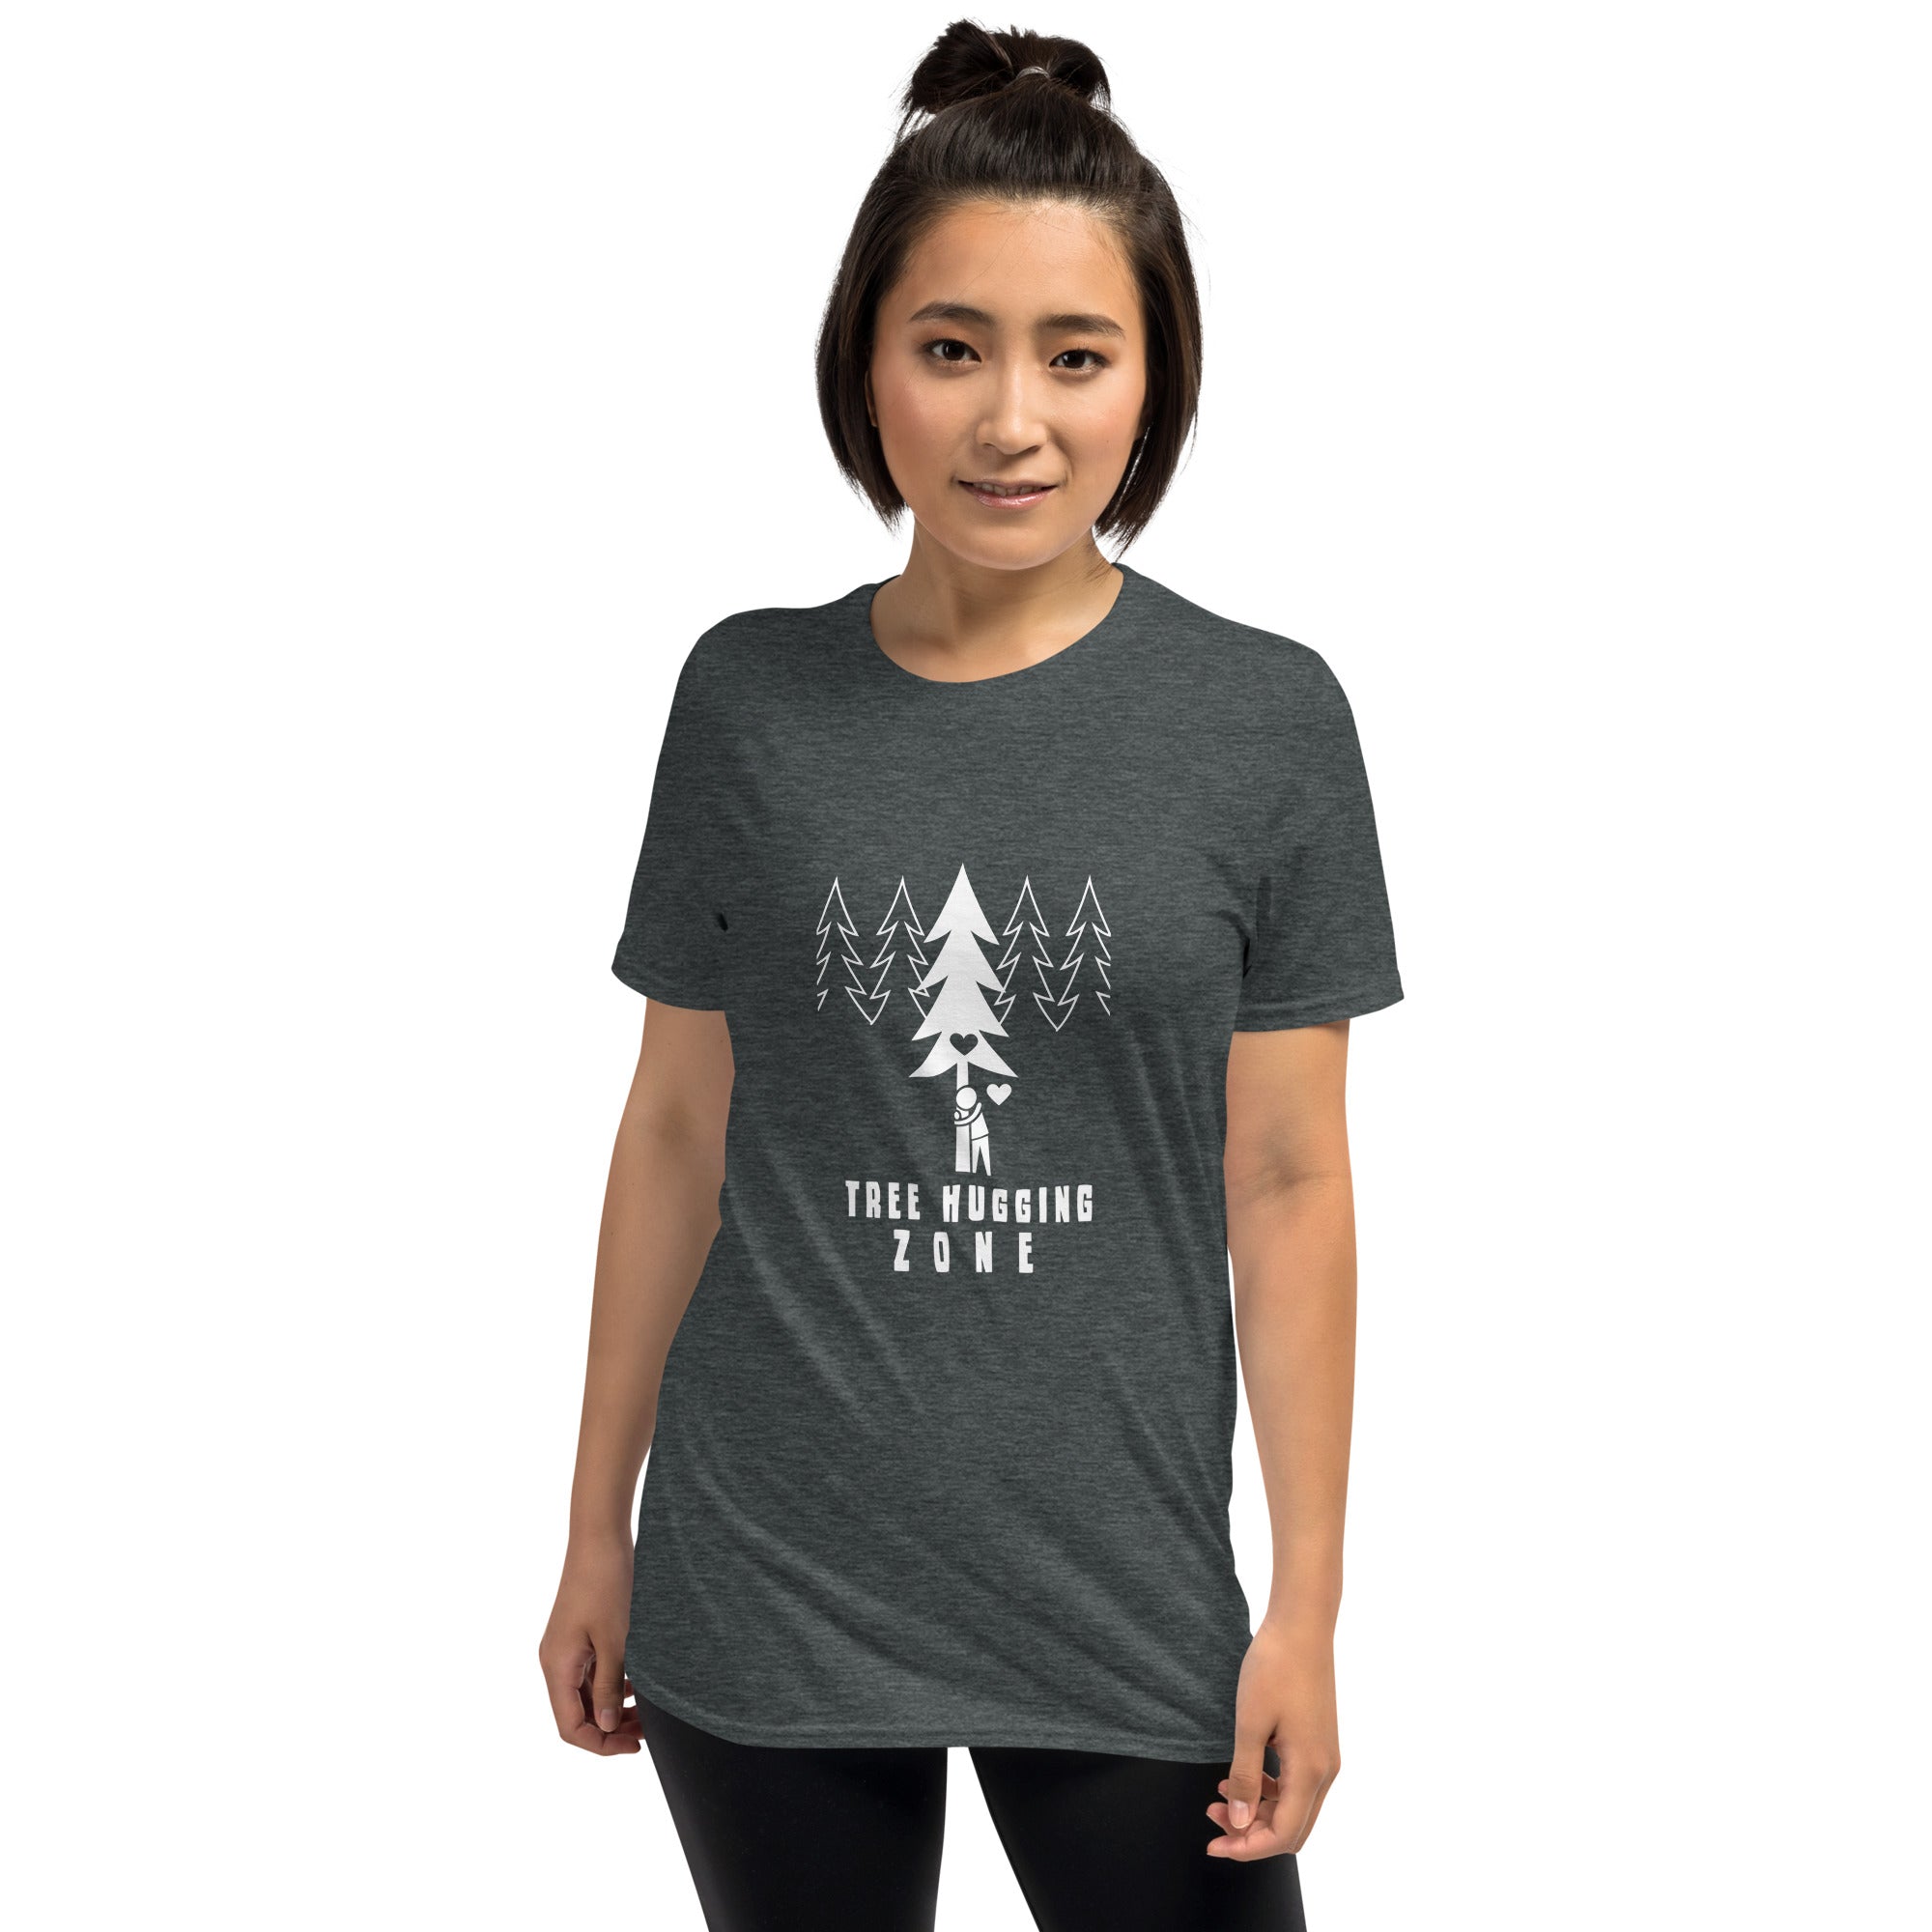 Softstyle Cotton T-Shirt Tree hugging zone white